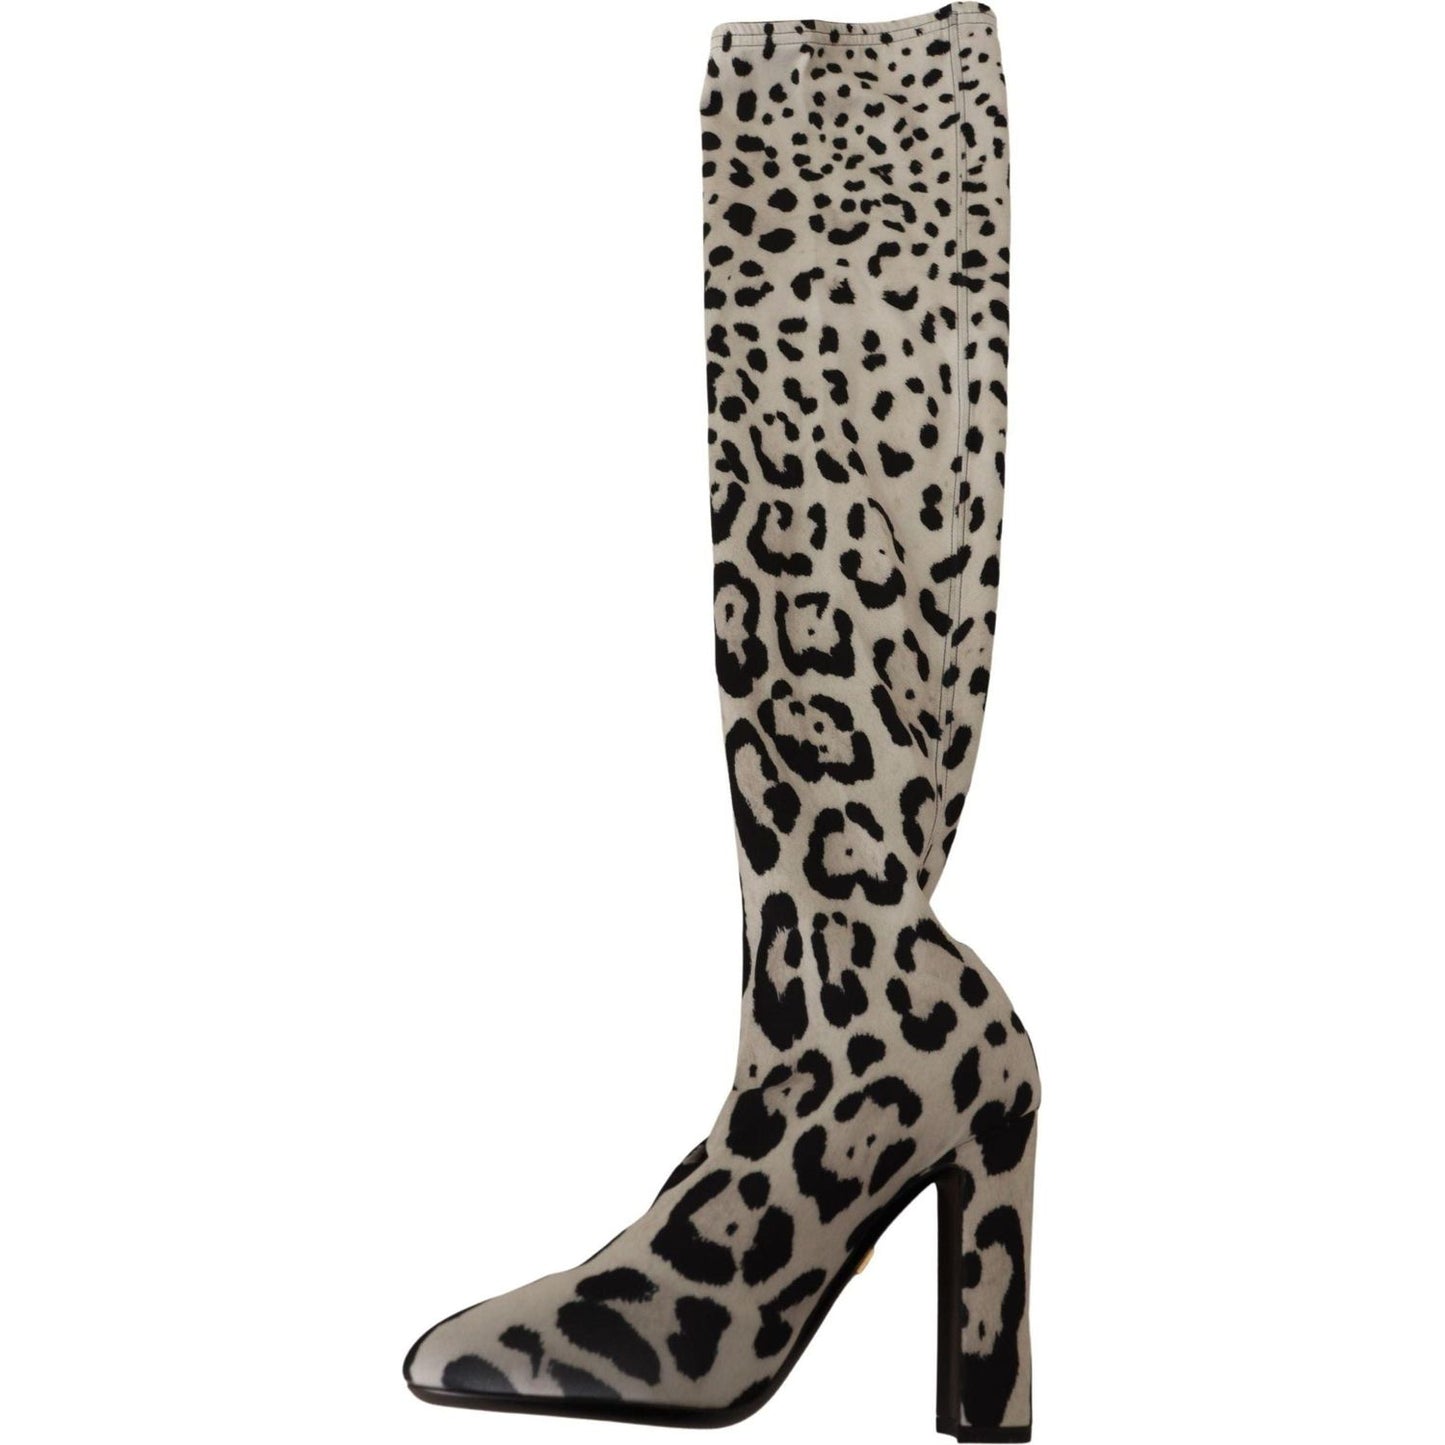 Dolce & Gabbana Chic Leopard High-Heel Over-Knee Boots white-black-leopard-stretch-long-boots IMG_5968-scaled-f8e468e3-8d1.jpg